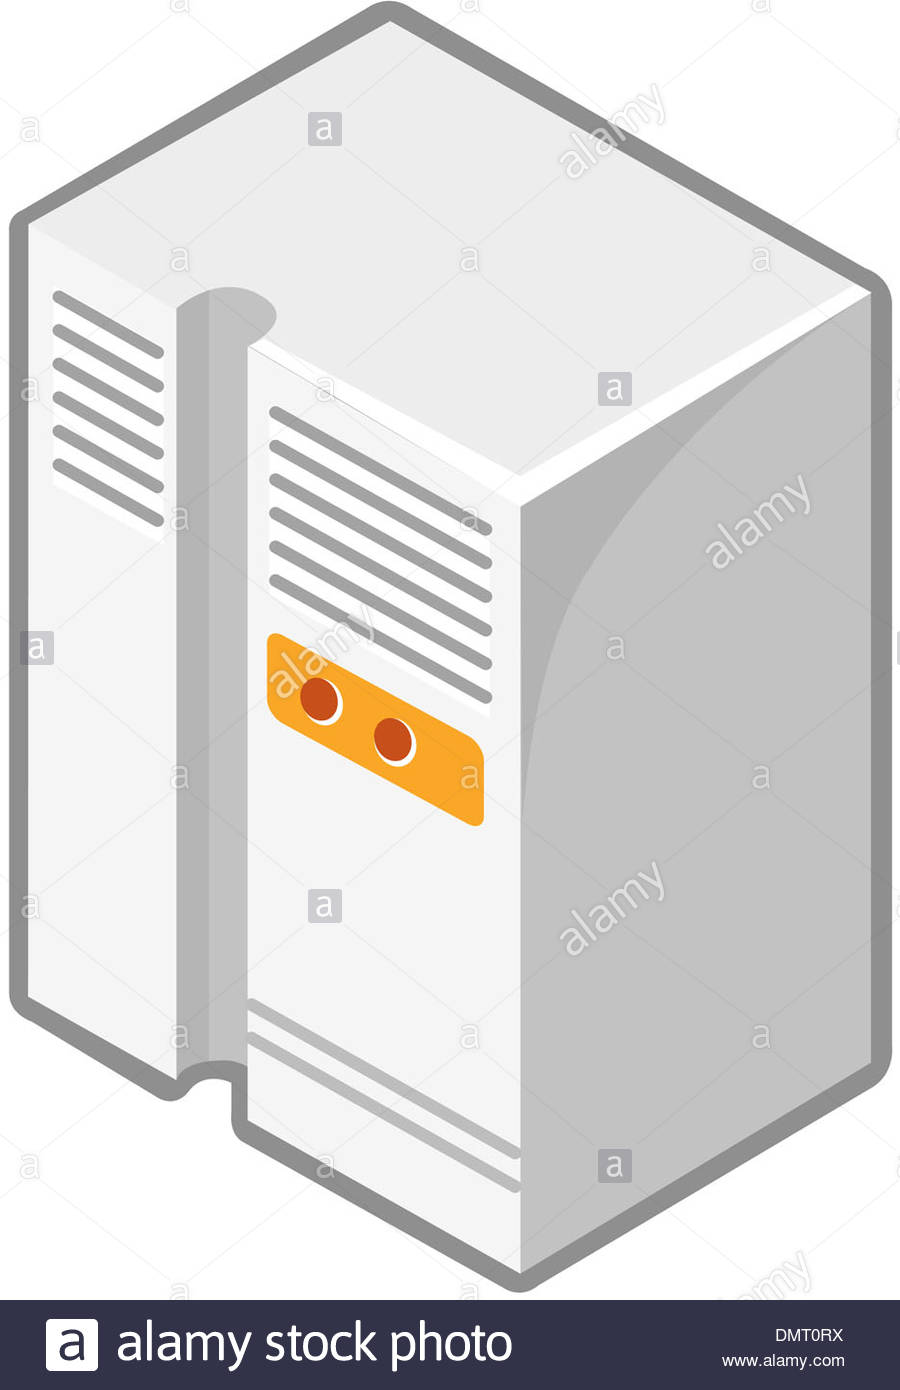 Network Equipment Icon. Network Router, Switch Or Server. Royalty 